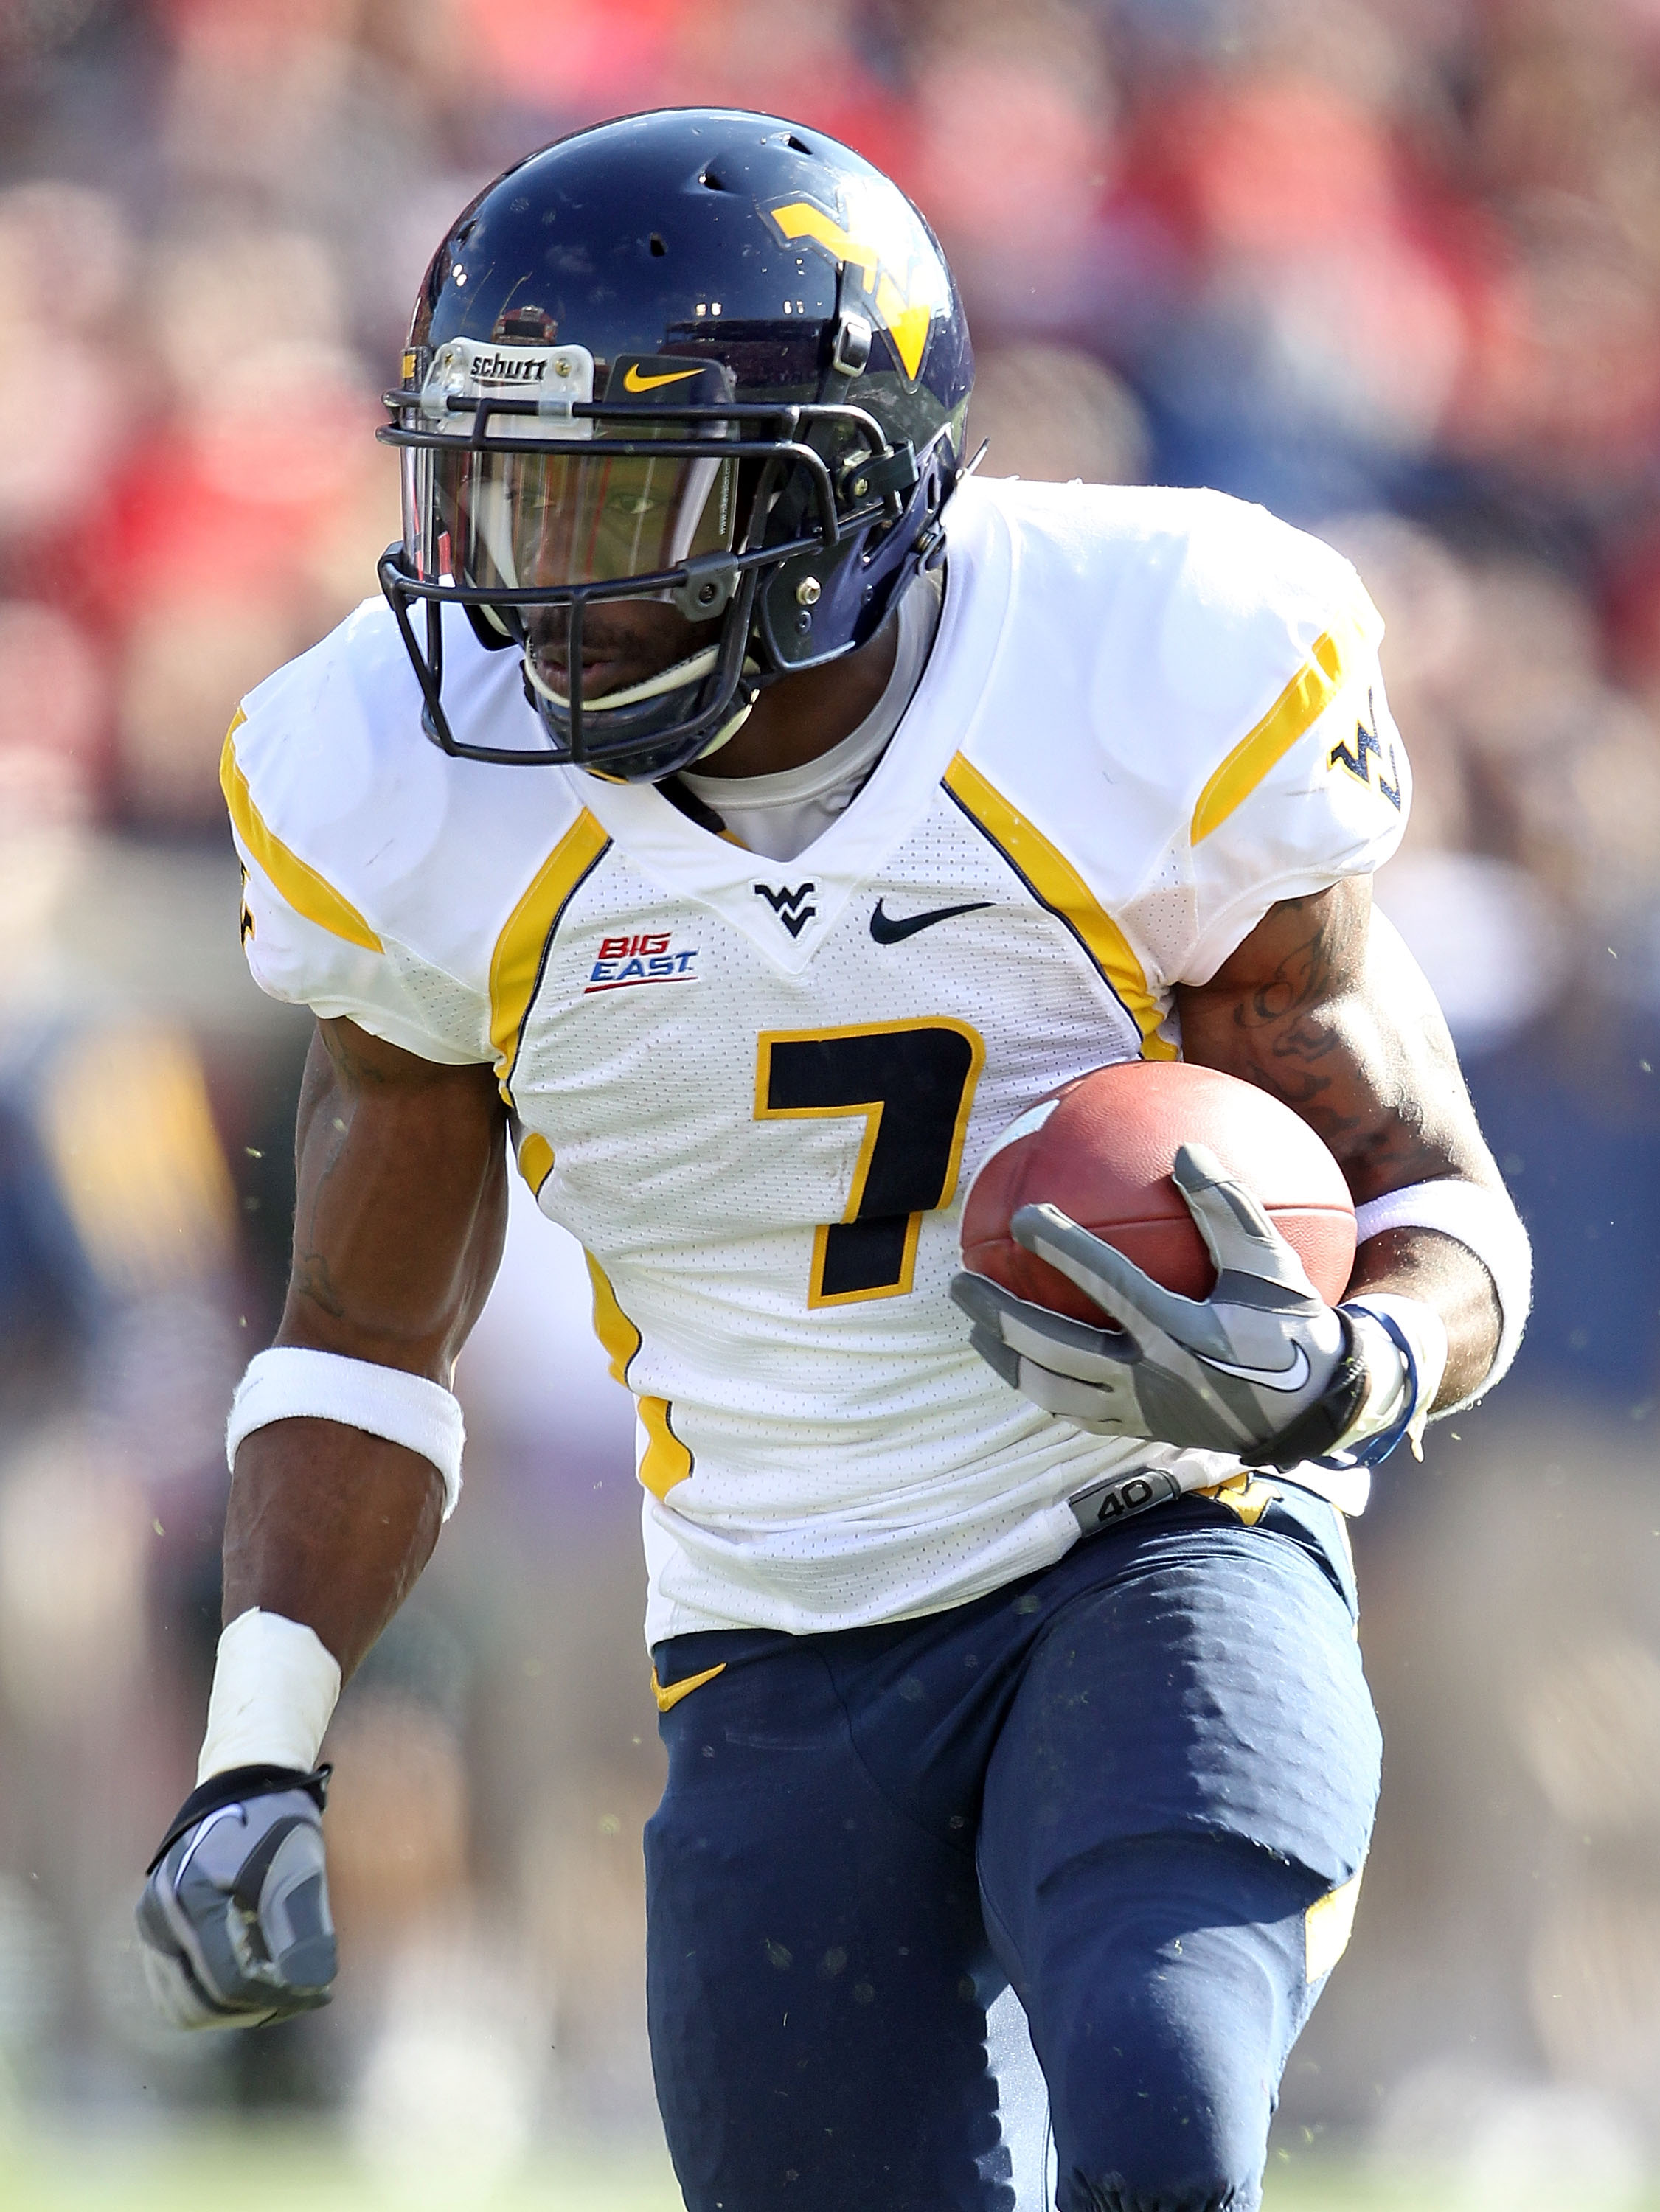 LOUISVILLE, KY - NOVEMBER 20:  Noel Devine #7 of the West Virginia Mountaineers runs with the ball during the Big East Conference game against the Louisville Cardinals at Papa John's Cardinal Stadium on November 20, 2010 in Louisville, Kentucky.  (Photo b